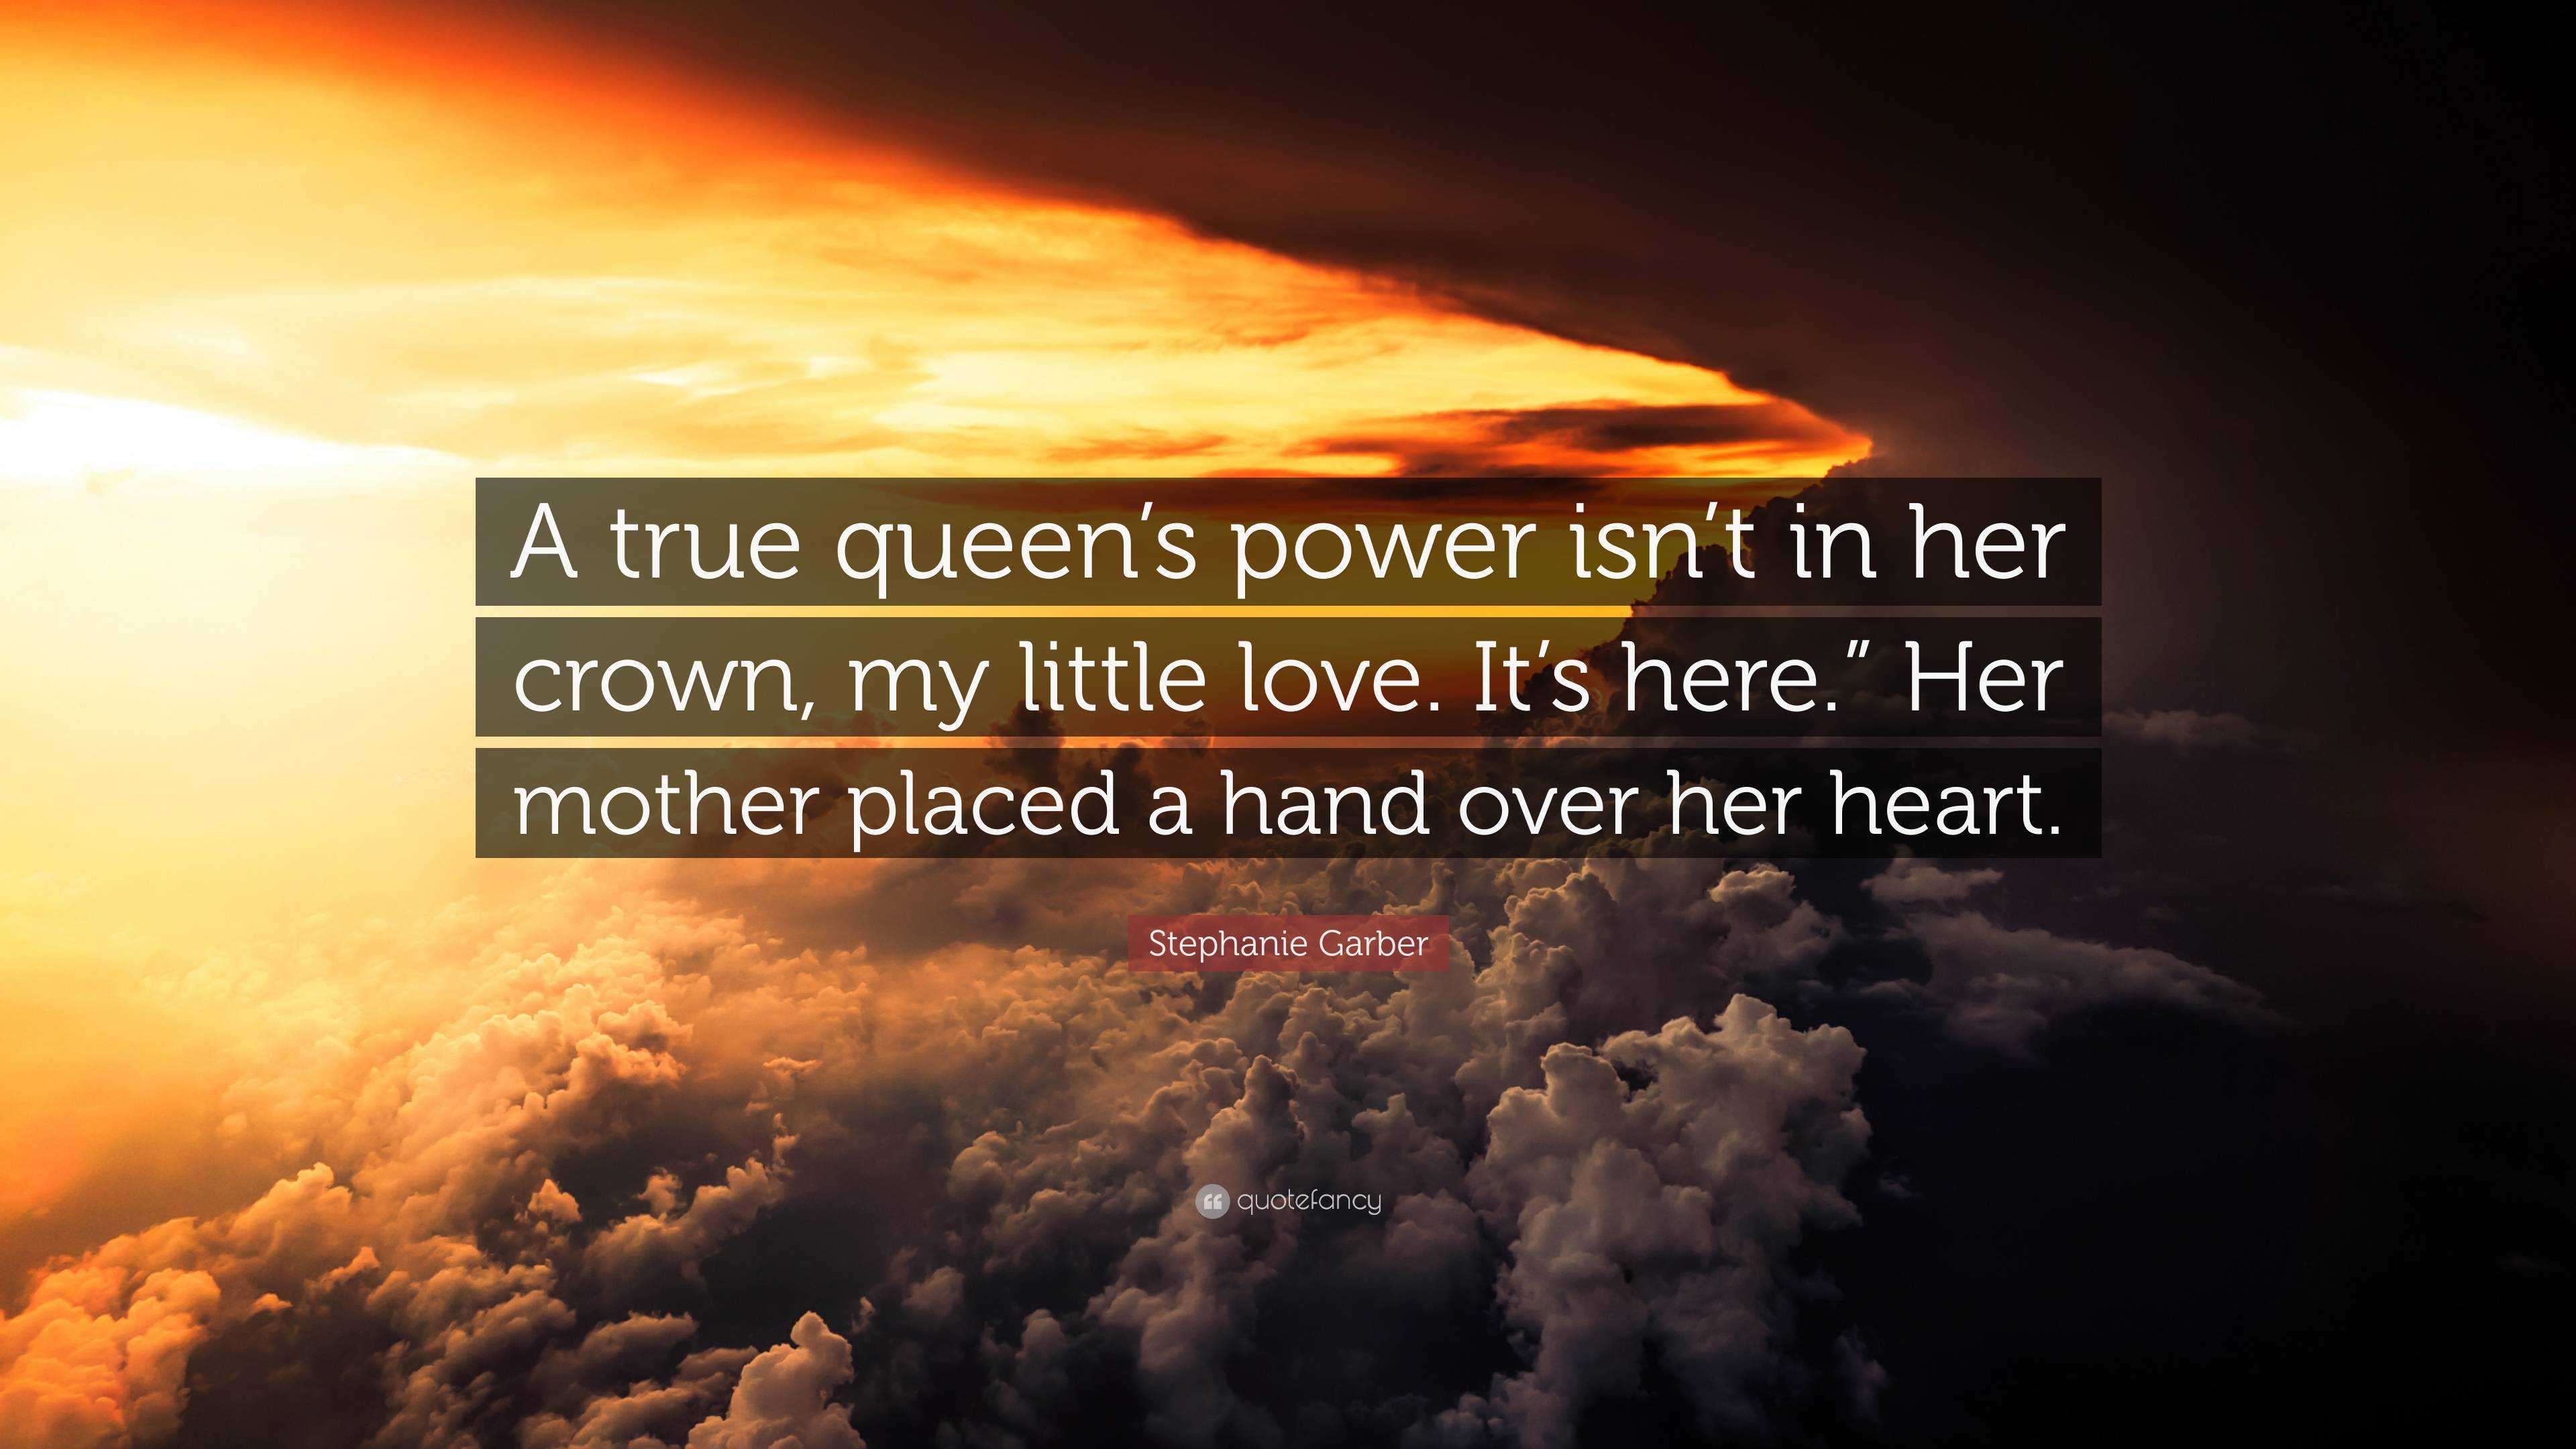 Love For Her Quotes - I crown you the Queen of my heart.